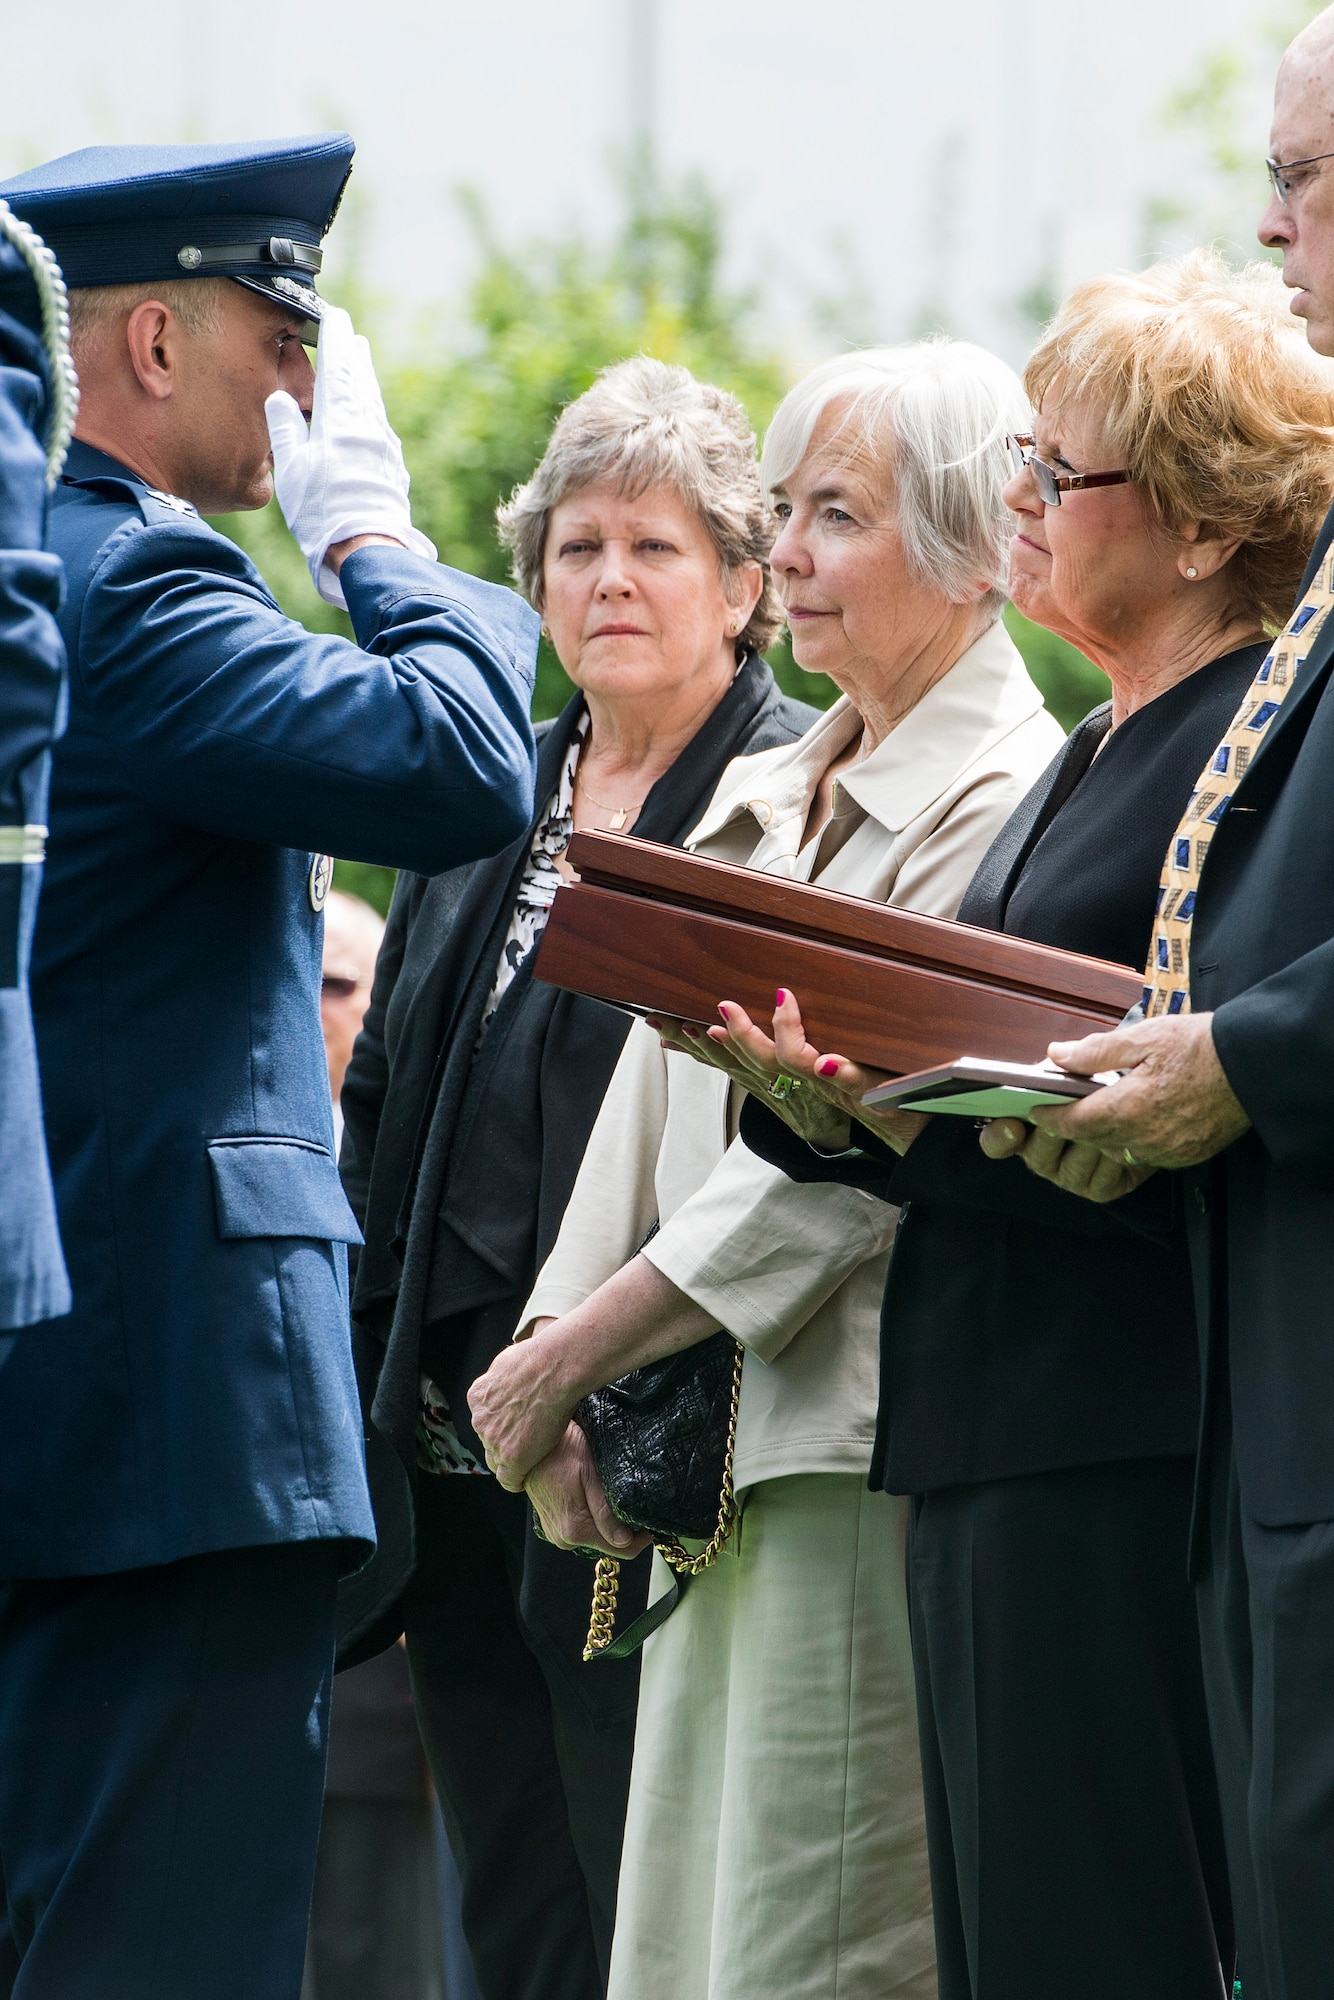 Col. Anthony Davit salutes as he presents an encased flag to Sue Scott, brother of Capt. Douglas D. Ferguson, May 2, 2014, in Lakewood, Wash. Ferguson's F-4D aircraft was shot down over Laos in 1969, and his remains were returned home after being missing for more than 44 years. Davit is the 627th Air Base Group commander. (U.S. Air Force photo/Tech. Sgt. Sean Tobin)